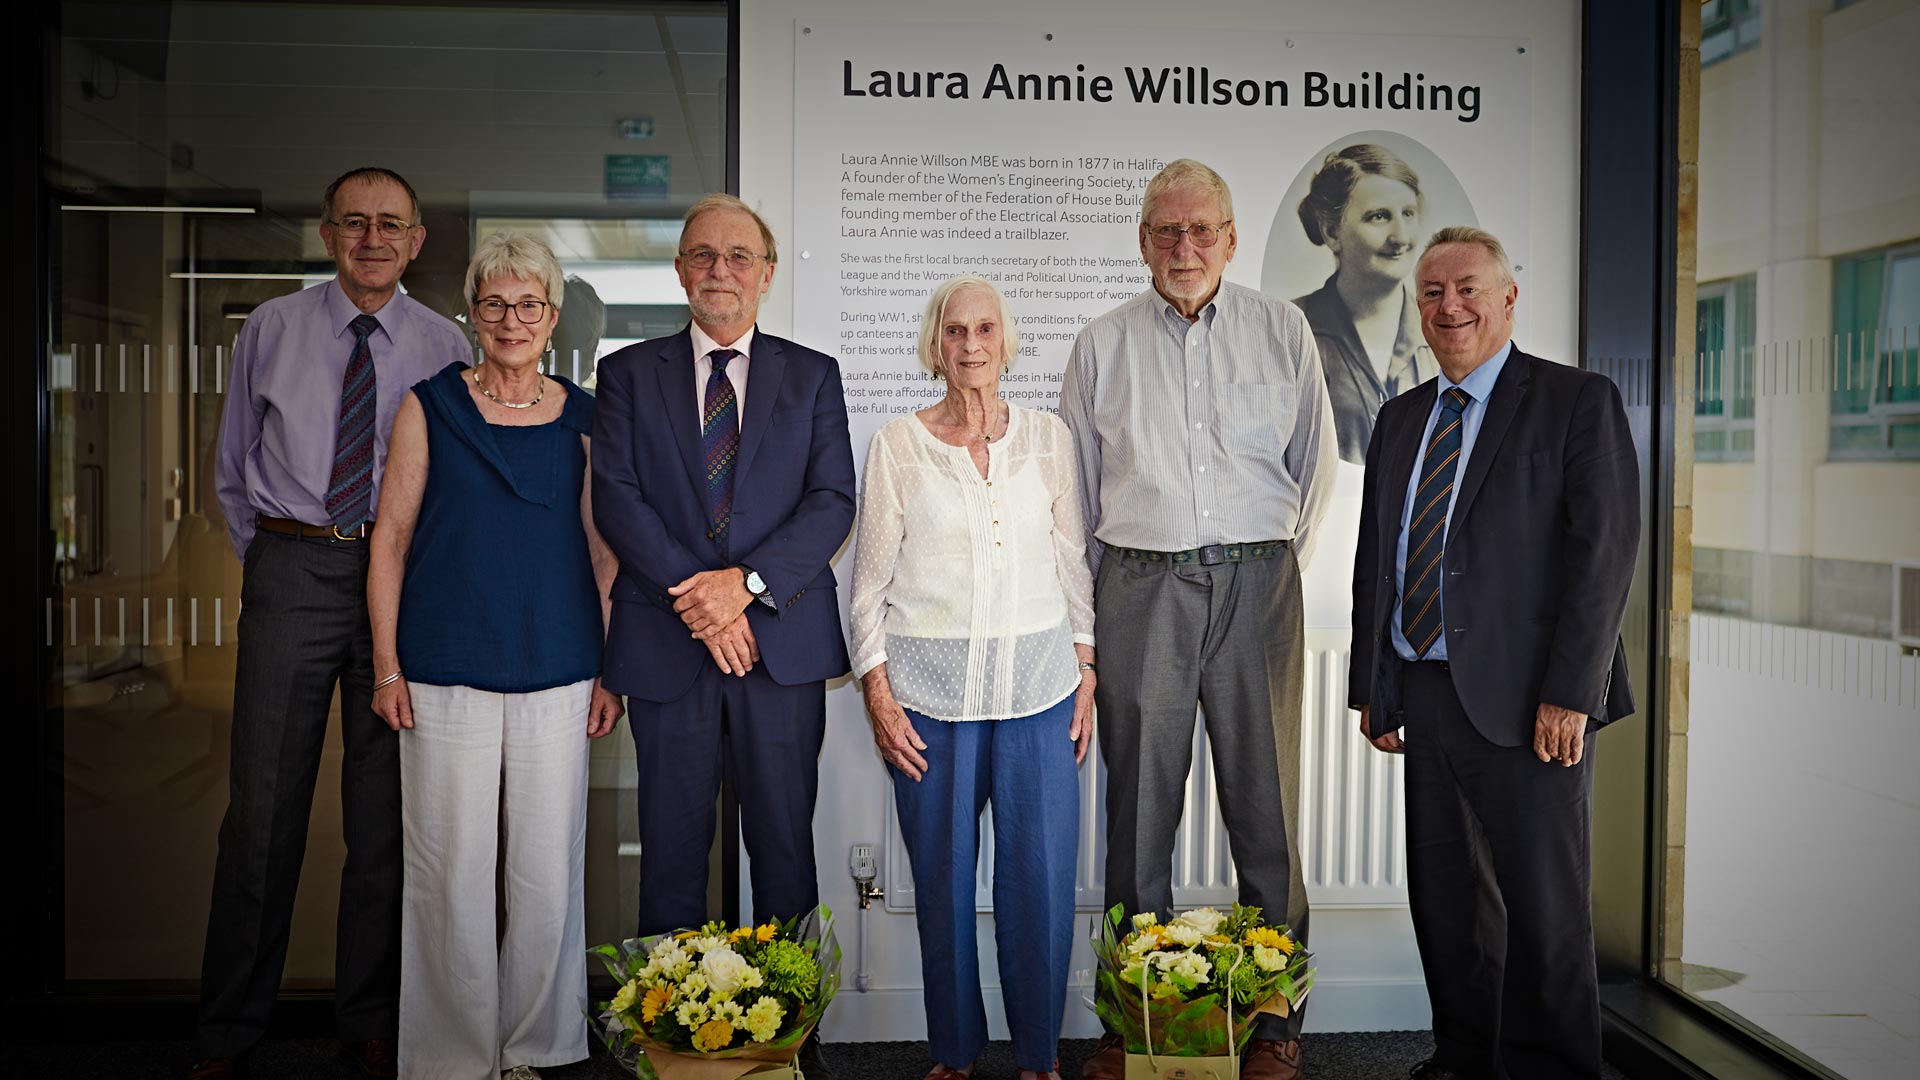 The official opening of the new Laura Annie Willson Building